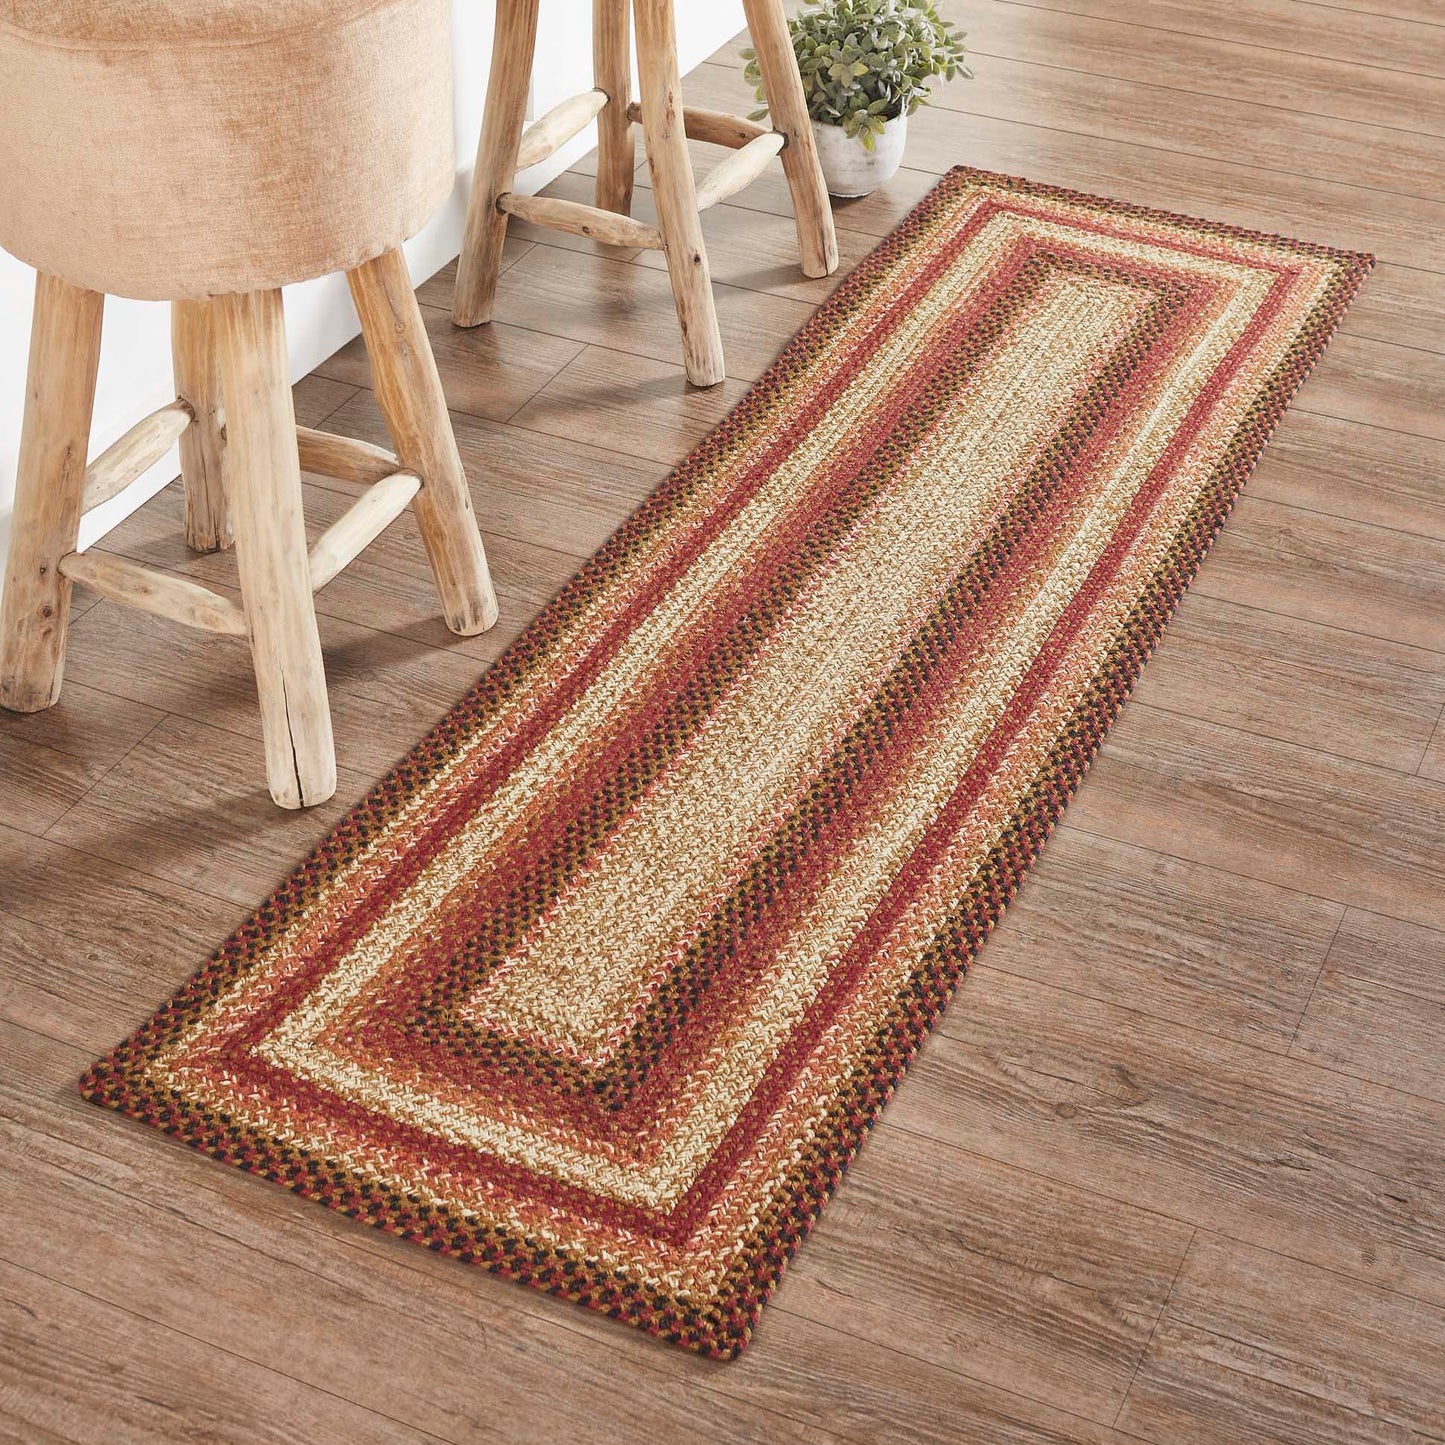 67119-Ginger-Spice-Jute-Rug-Runner-Rect-w-Pad-22x72-image-1